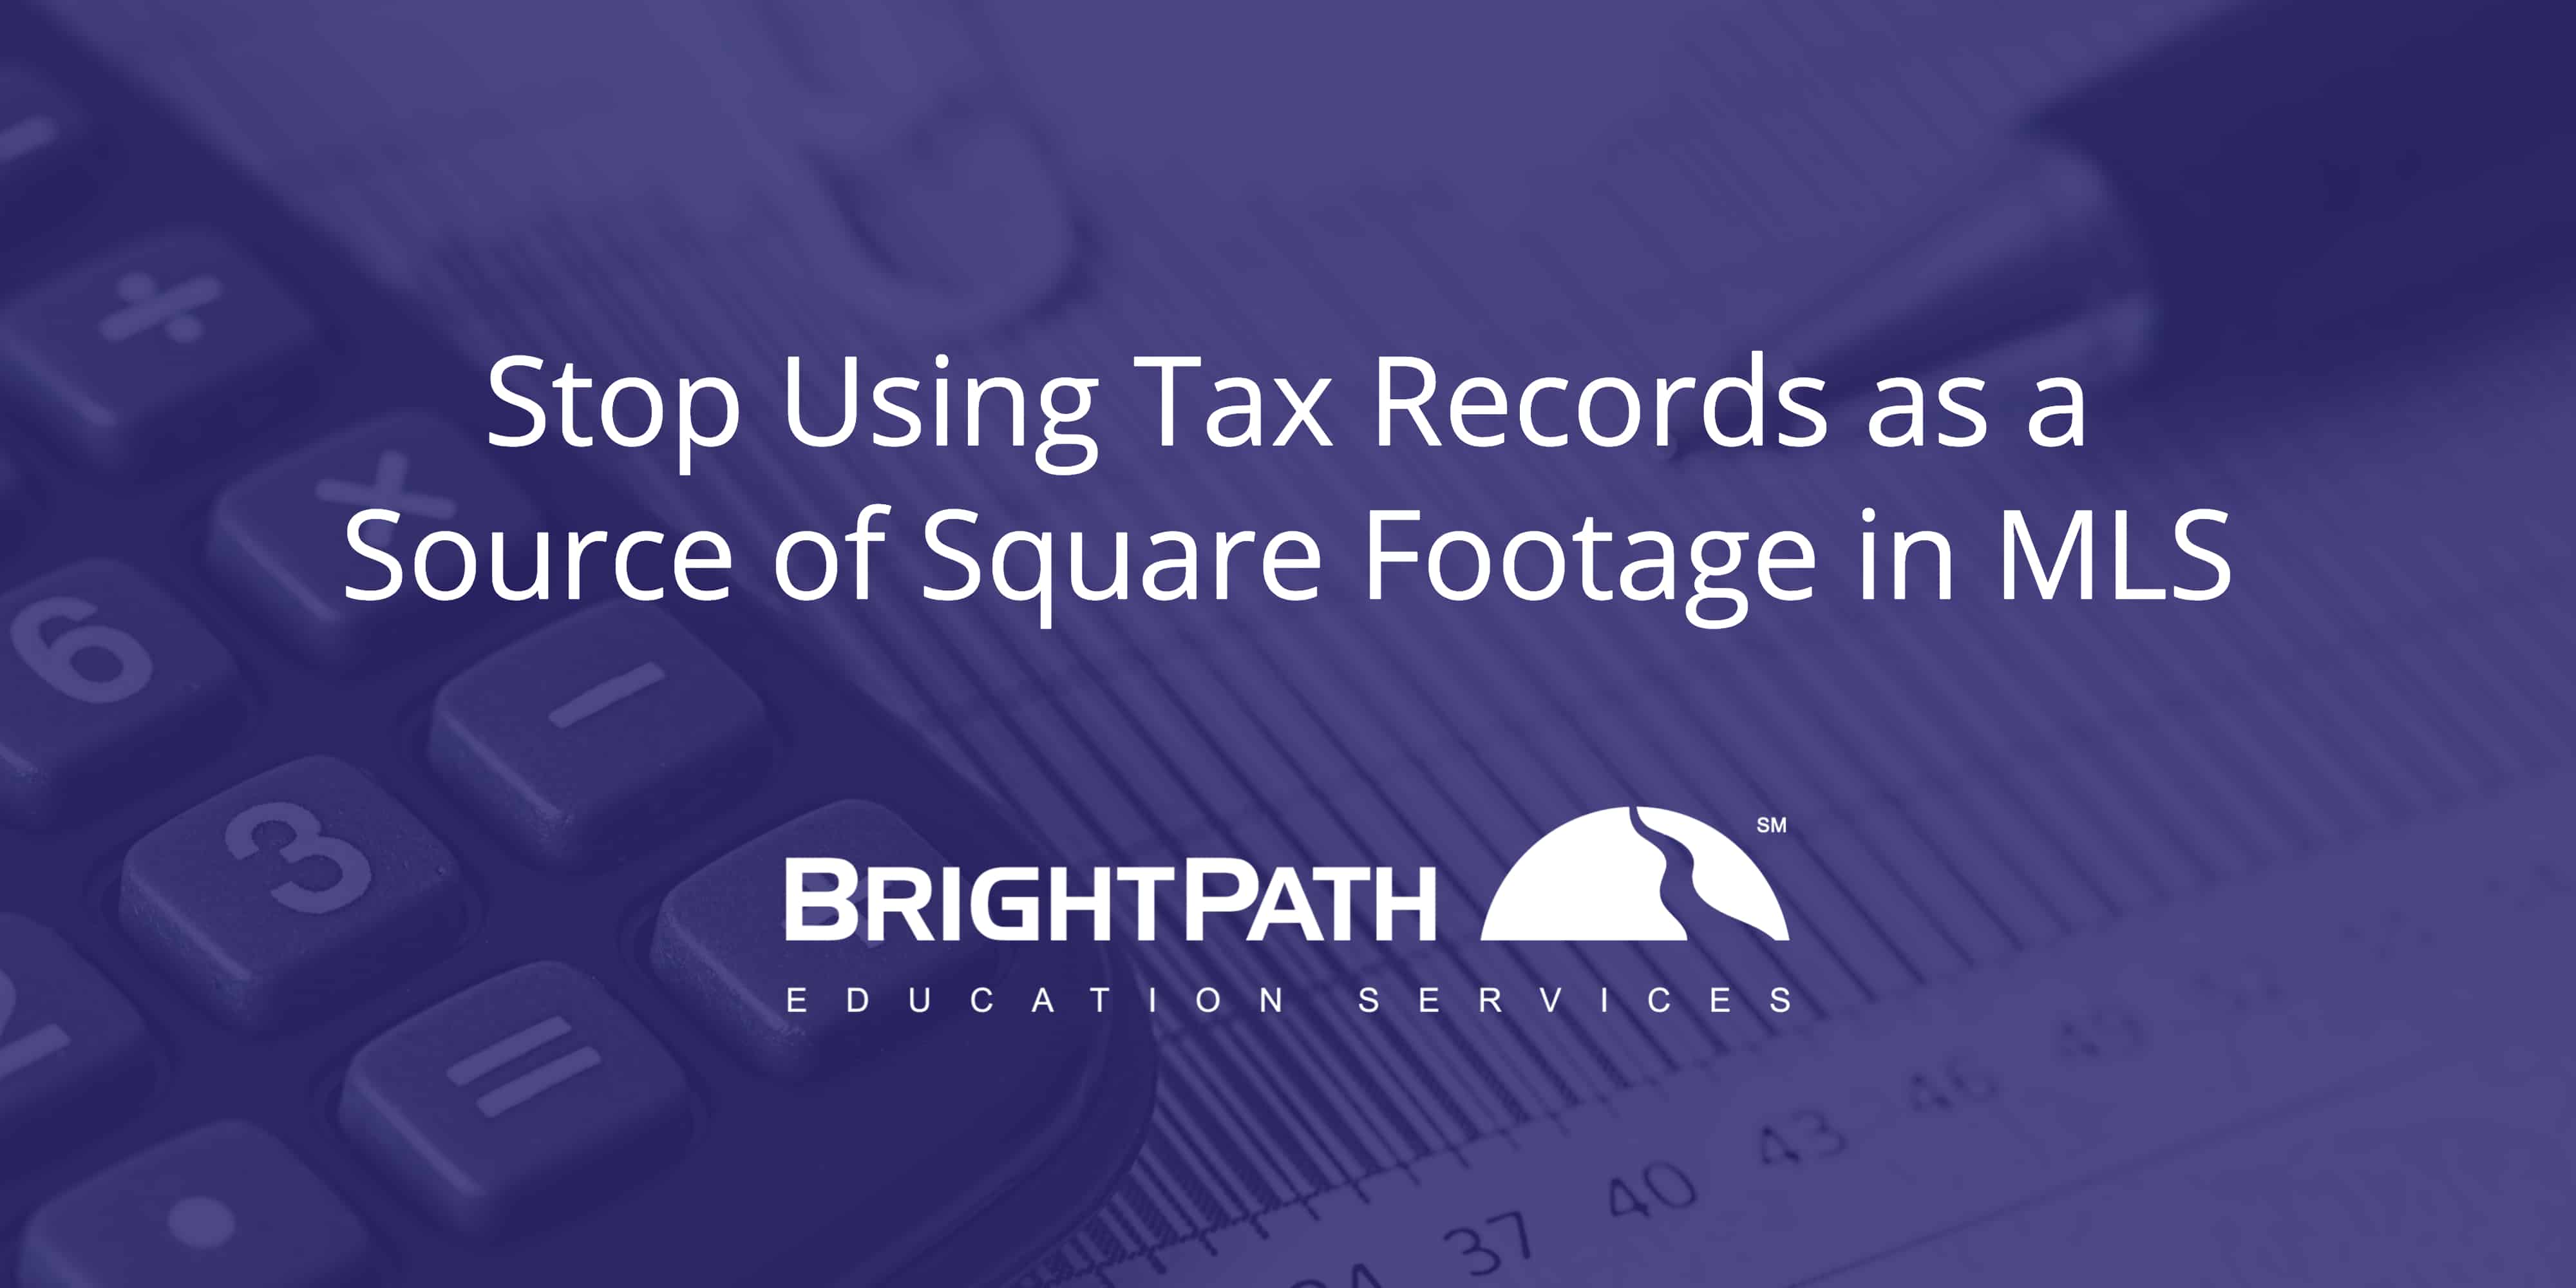 North Carolina realtors need to stop using tax records as a source of square footage in the multiple listing service (MLS)